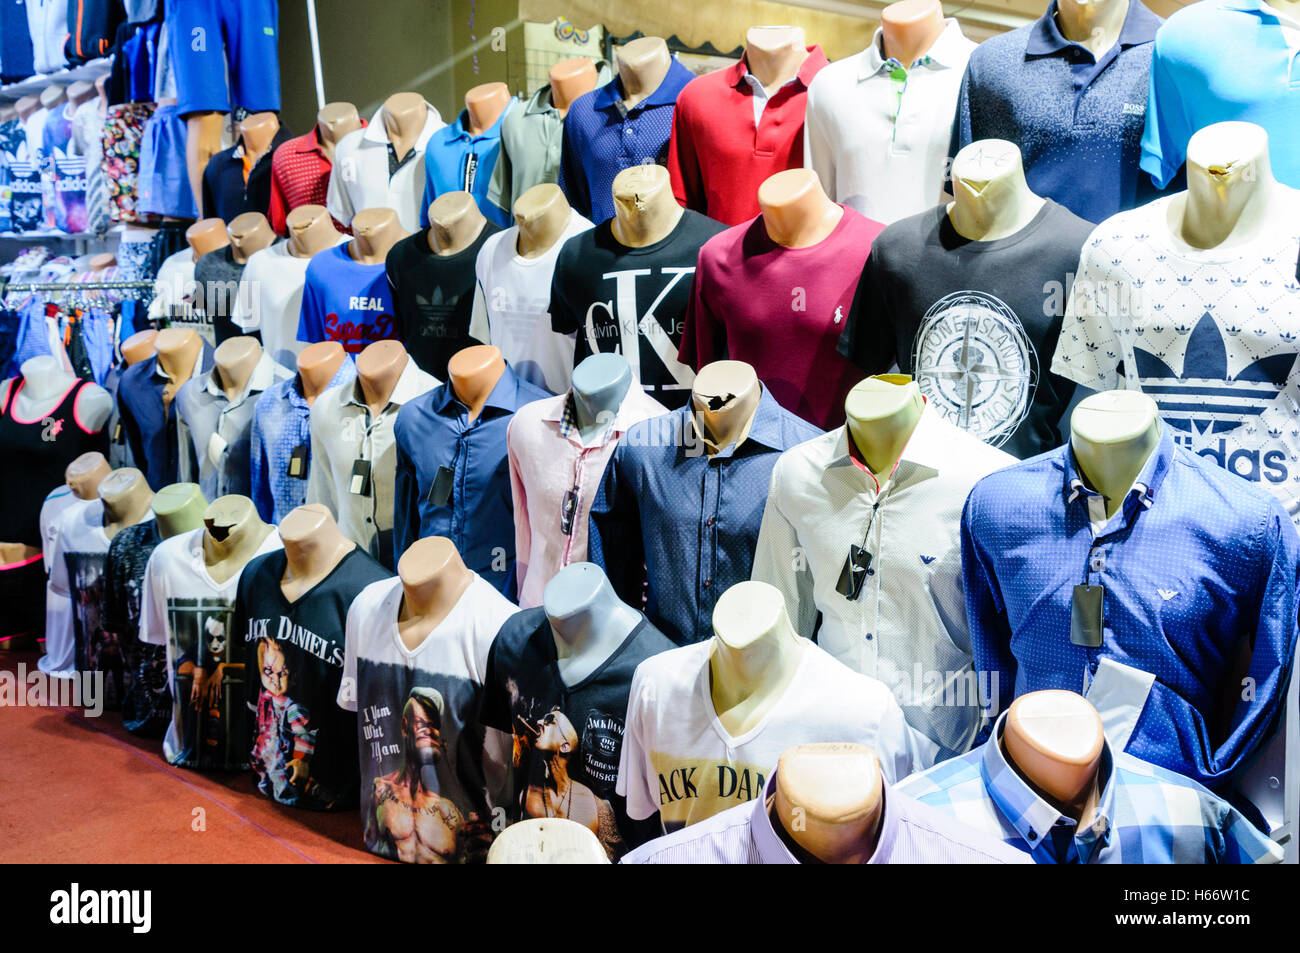 Shop in Turkey selling counterfeit clothing, tee shirts and sportswear  including Adidas, Calvin Klein, Jack Daniels, Superdry, Armani etc Stock  Photo - Alamy